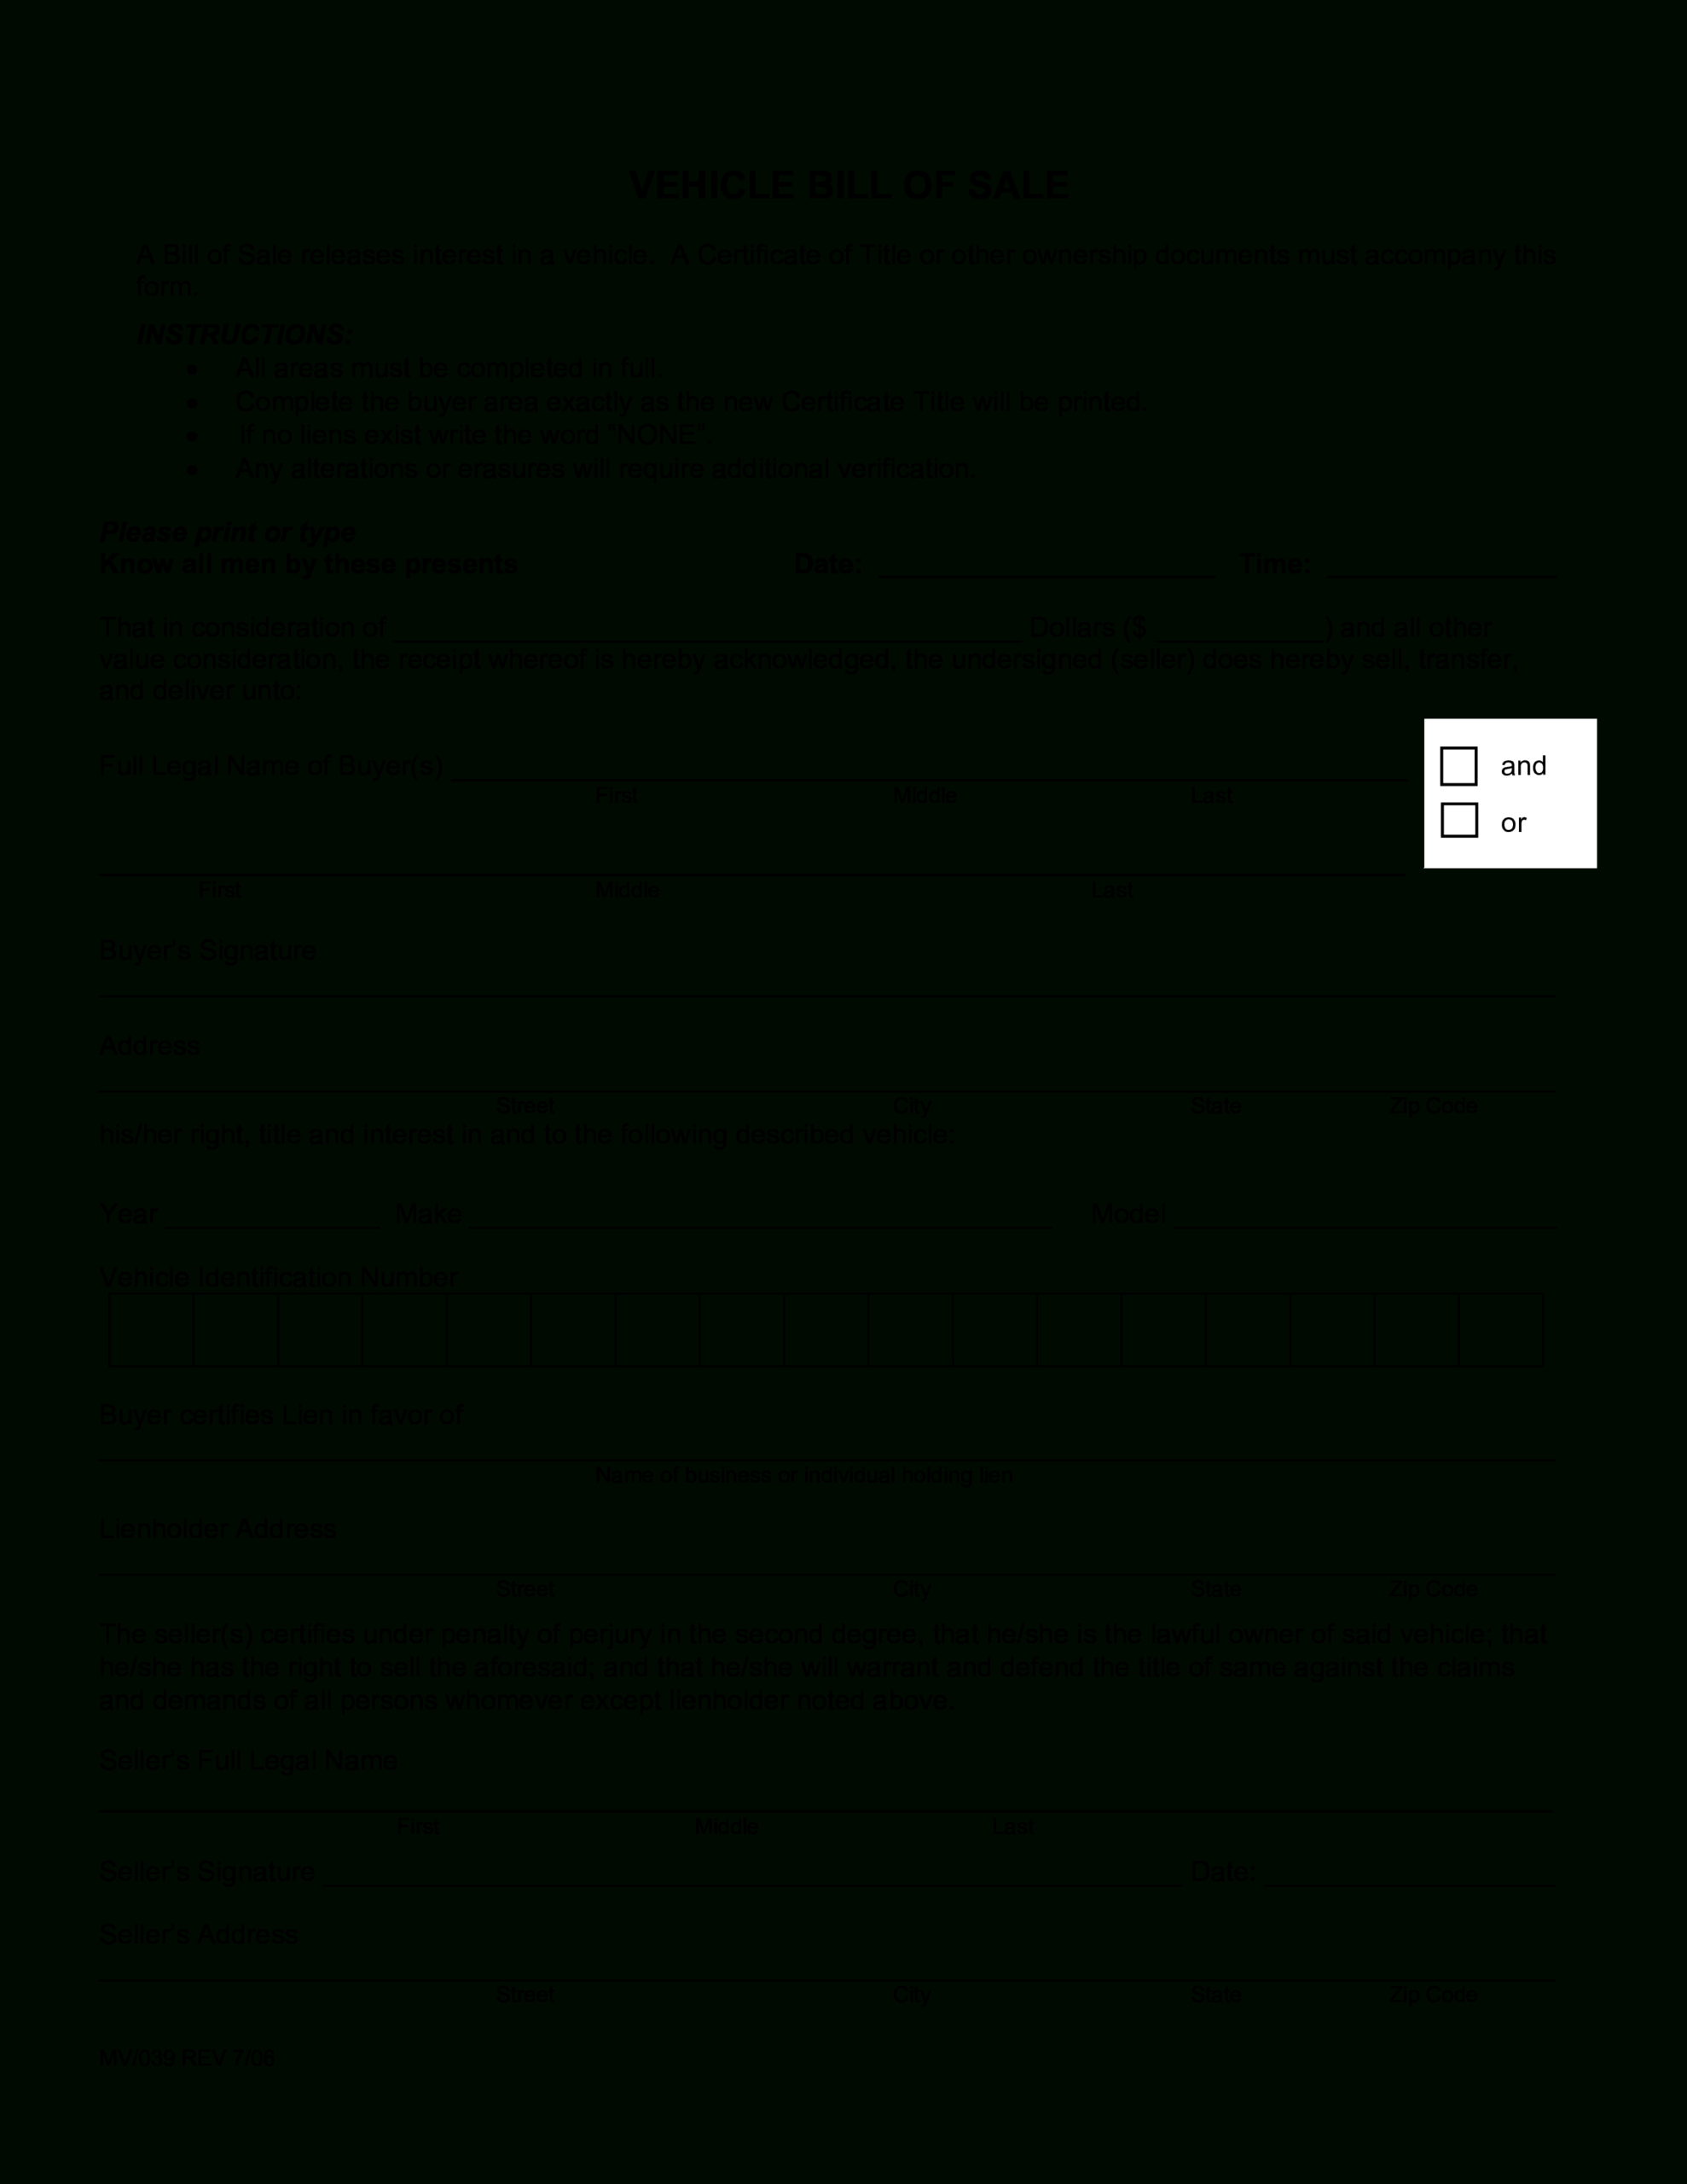 Legal Blank Bill Of Sale | Templates At Allbusinesstemplates With Regard To Blank Legal Document Template